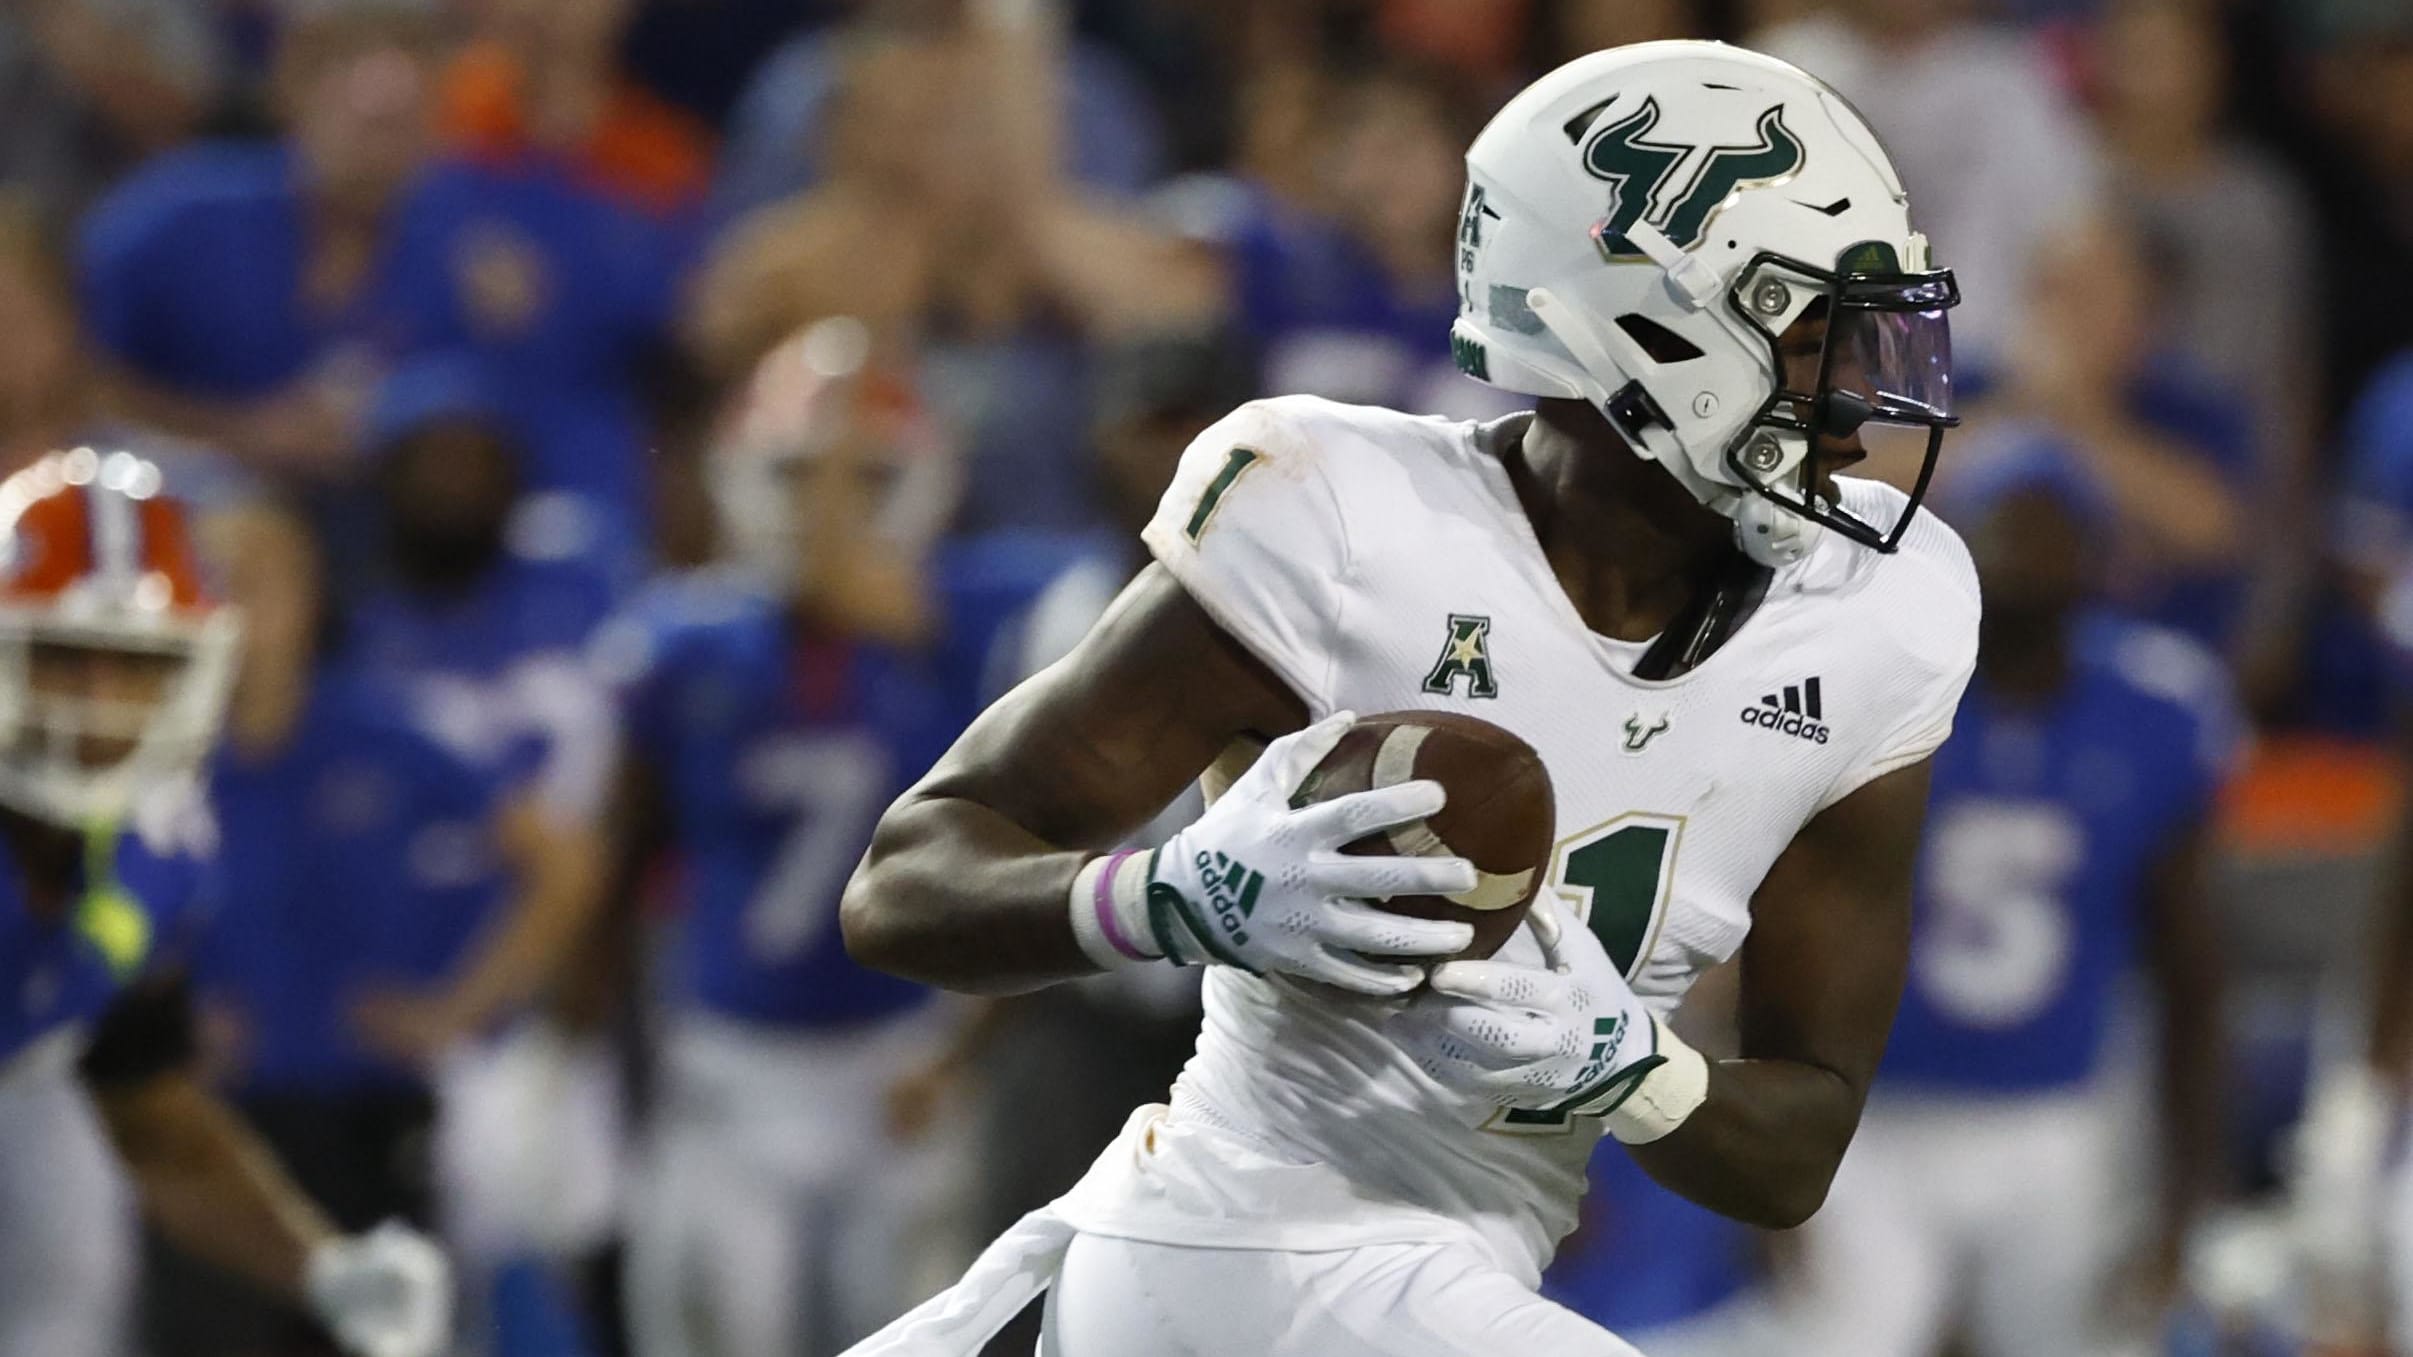 TRANSFER PORTAL: USF Wide Receiver Enters Portal For The Second Time